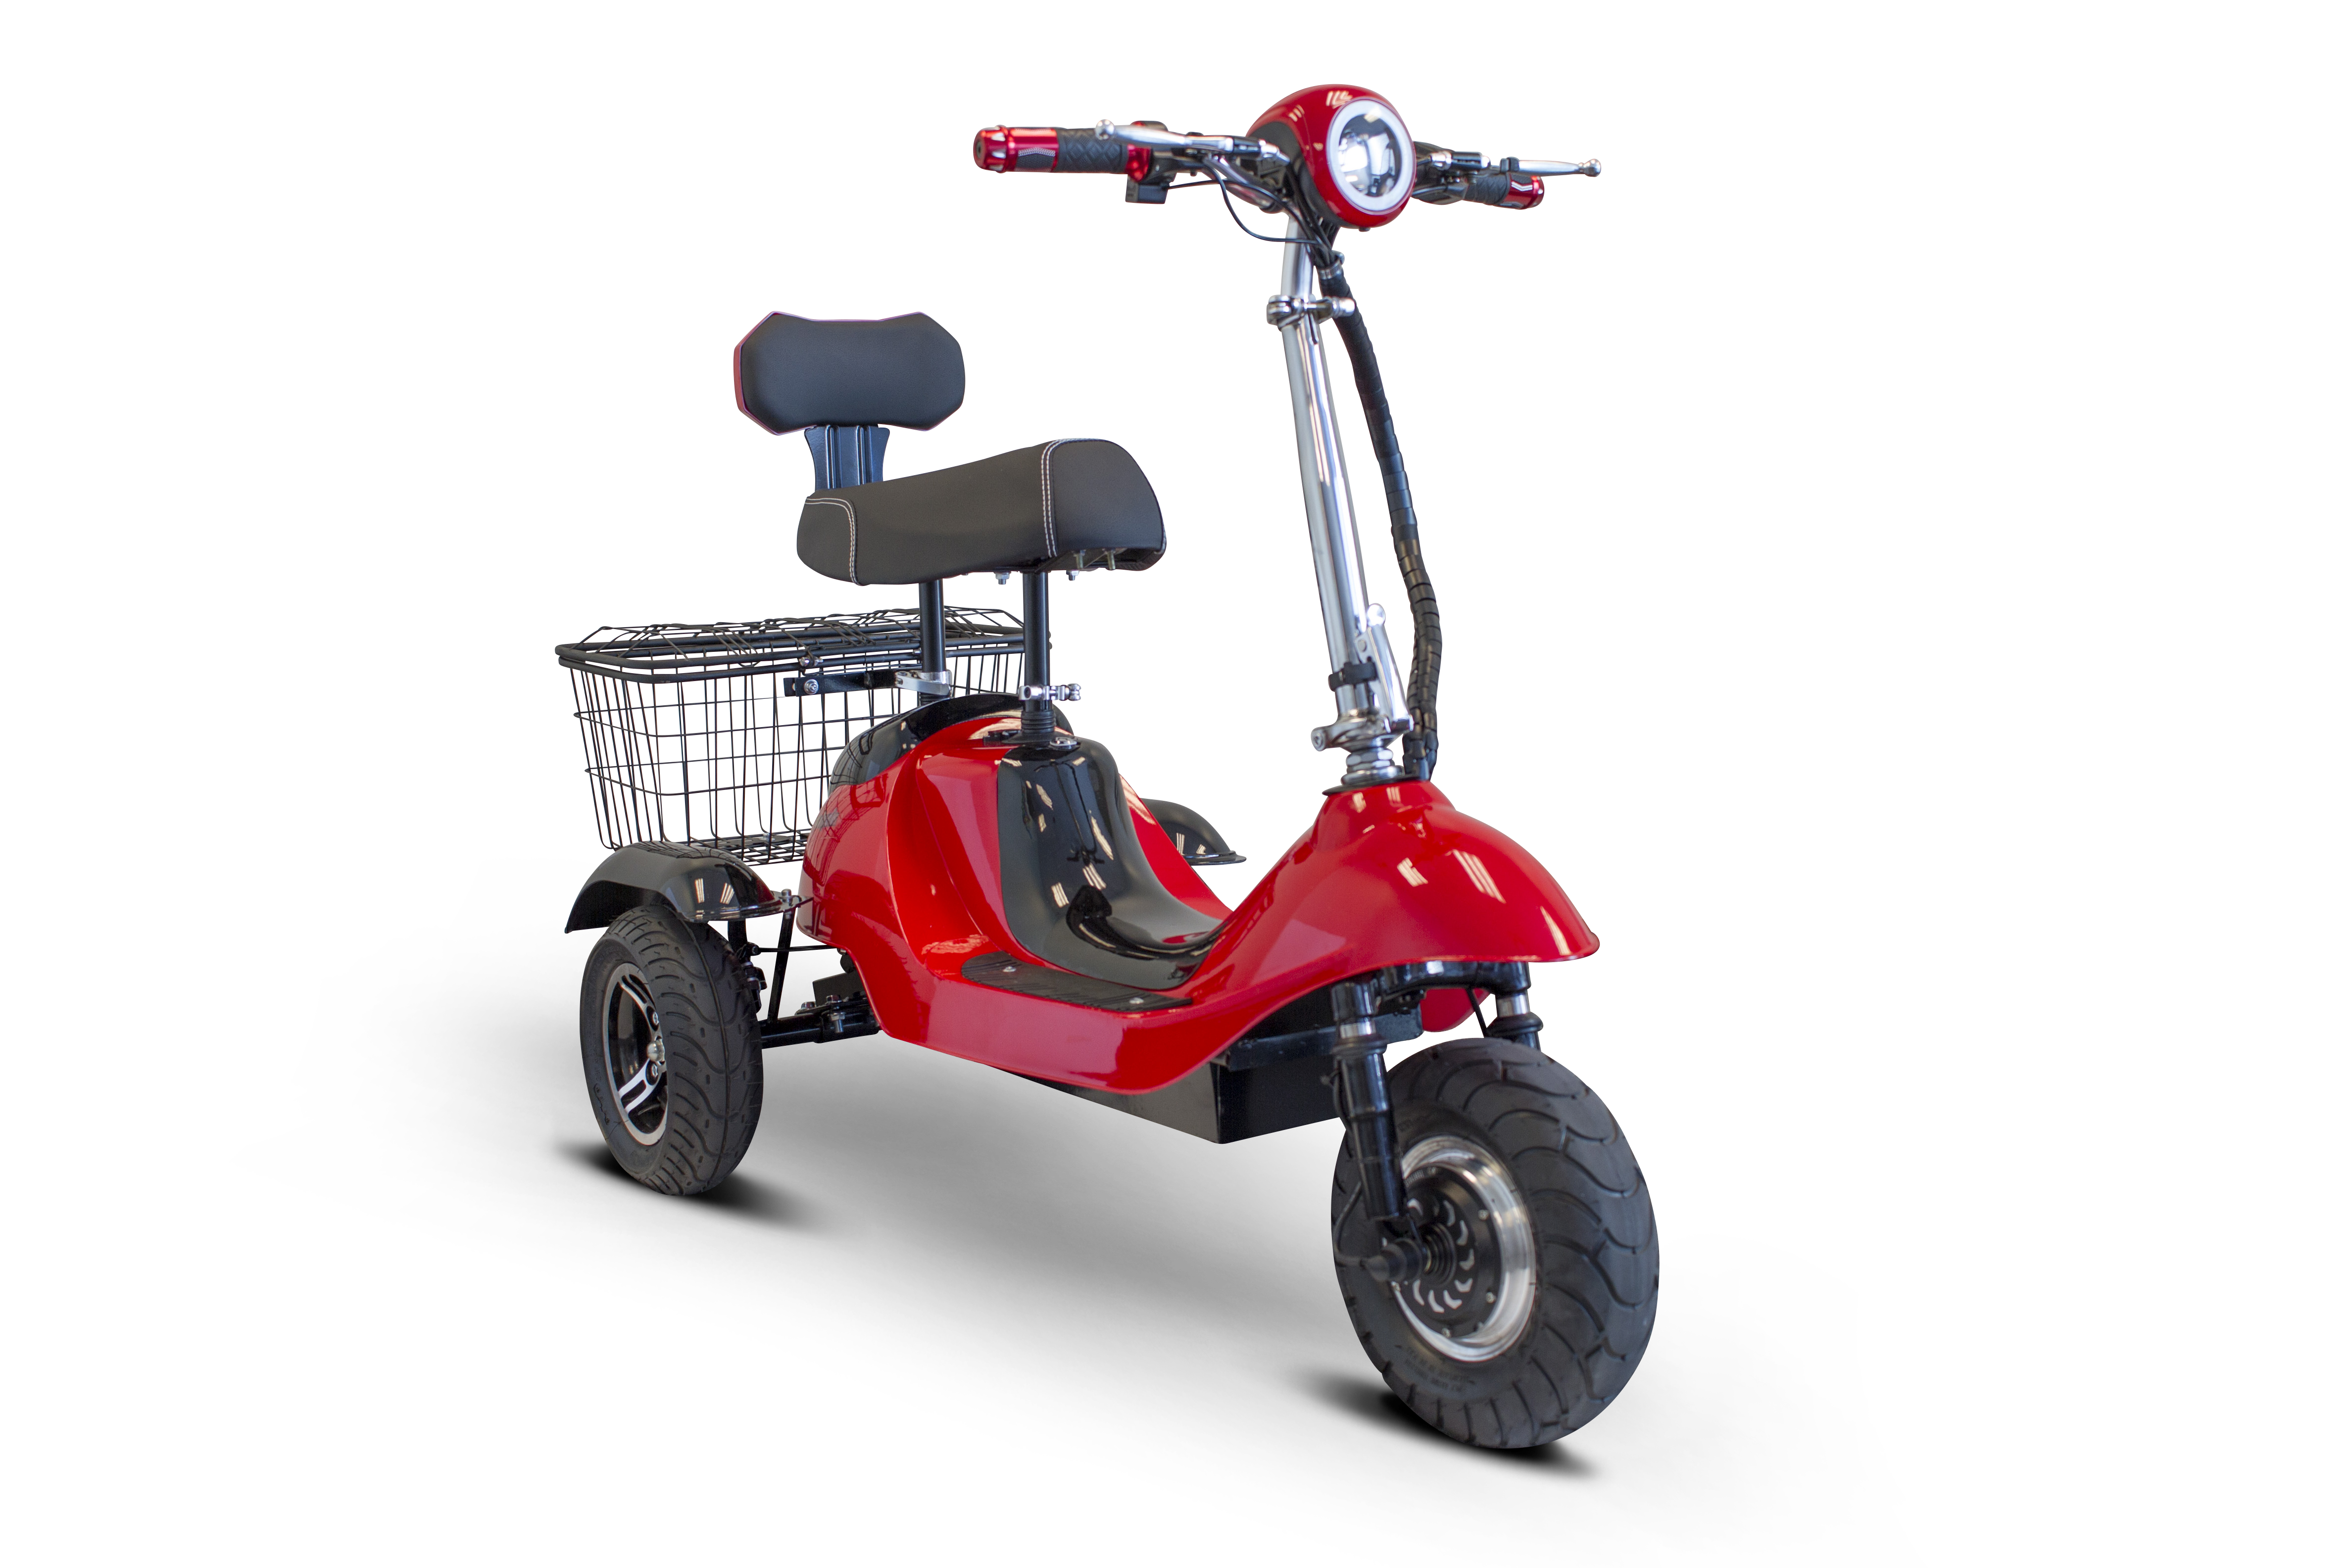 EW-19 500W High Speed Long Range Scooter 48V with Rear Basket